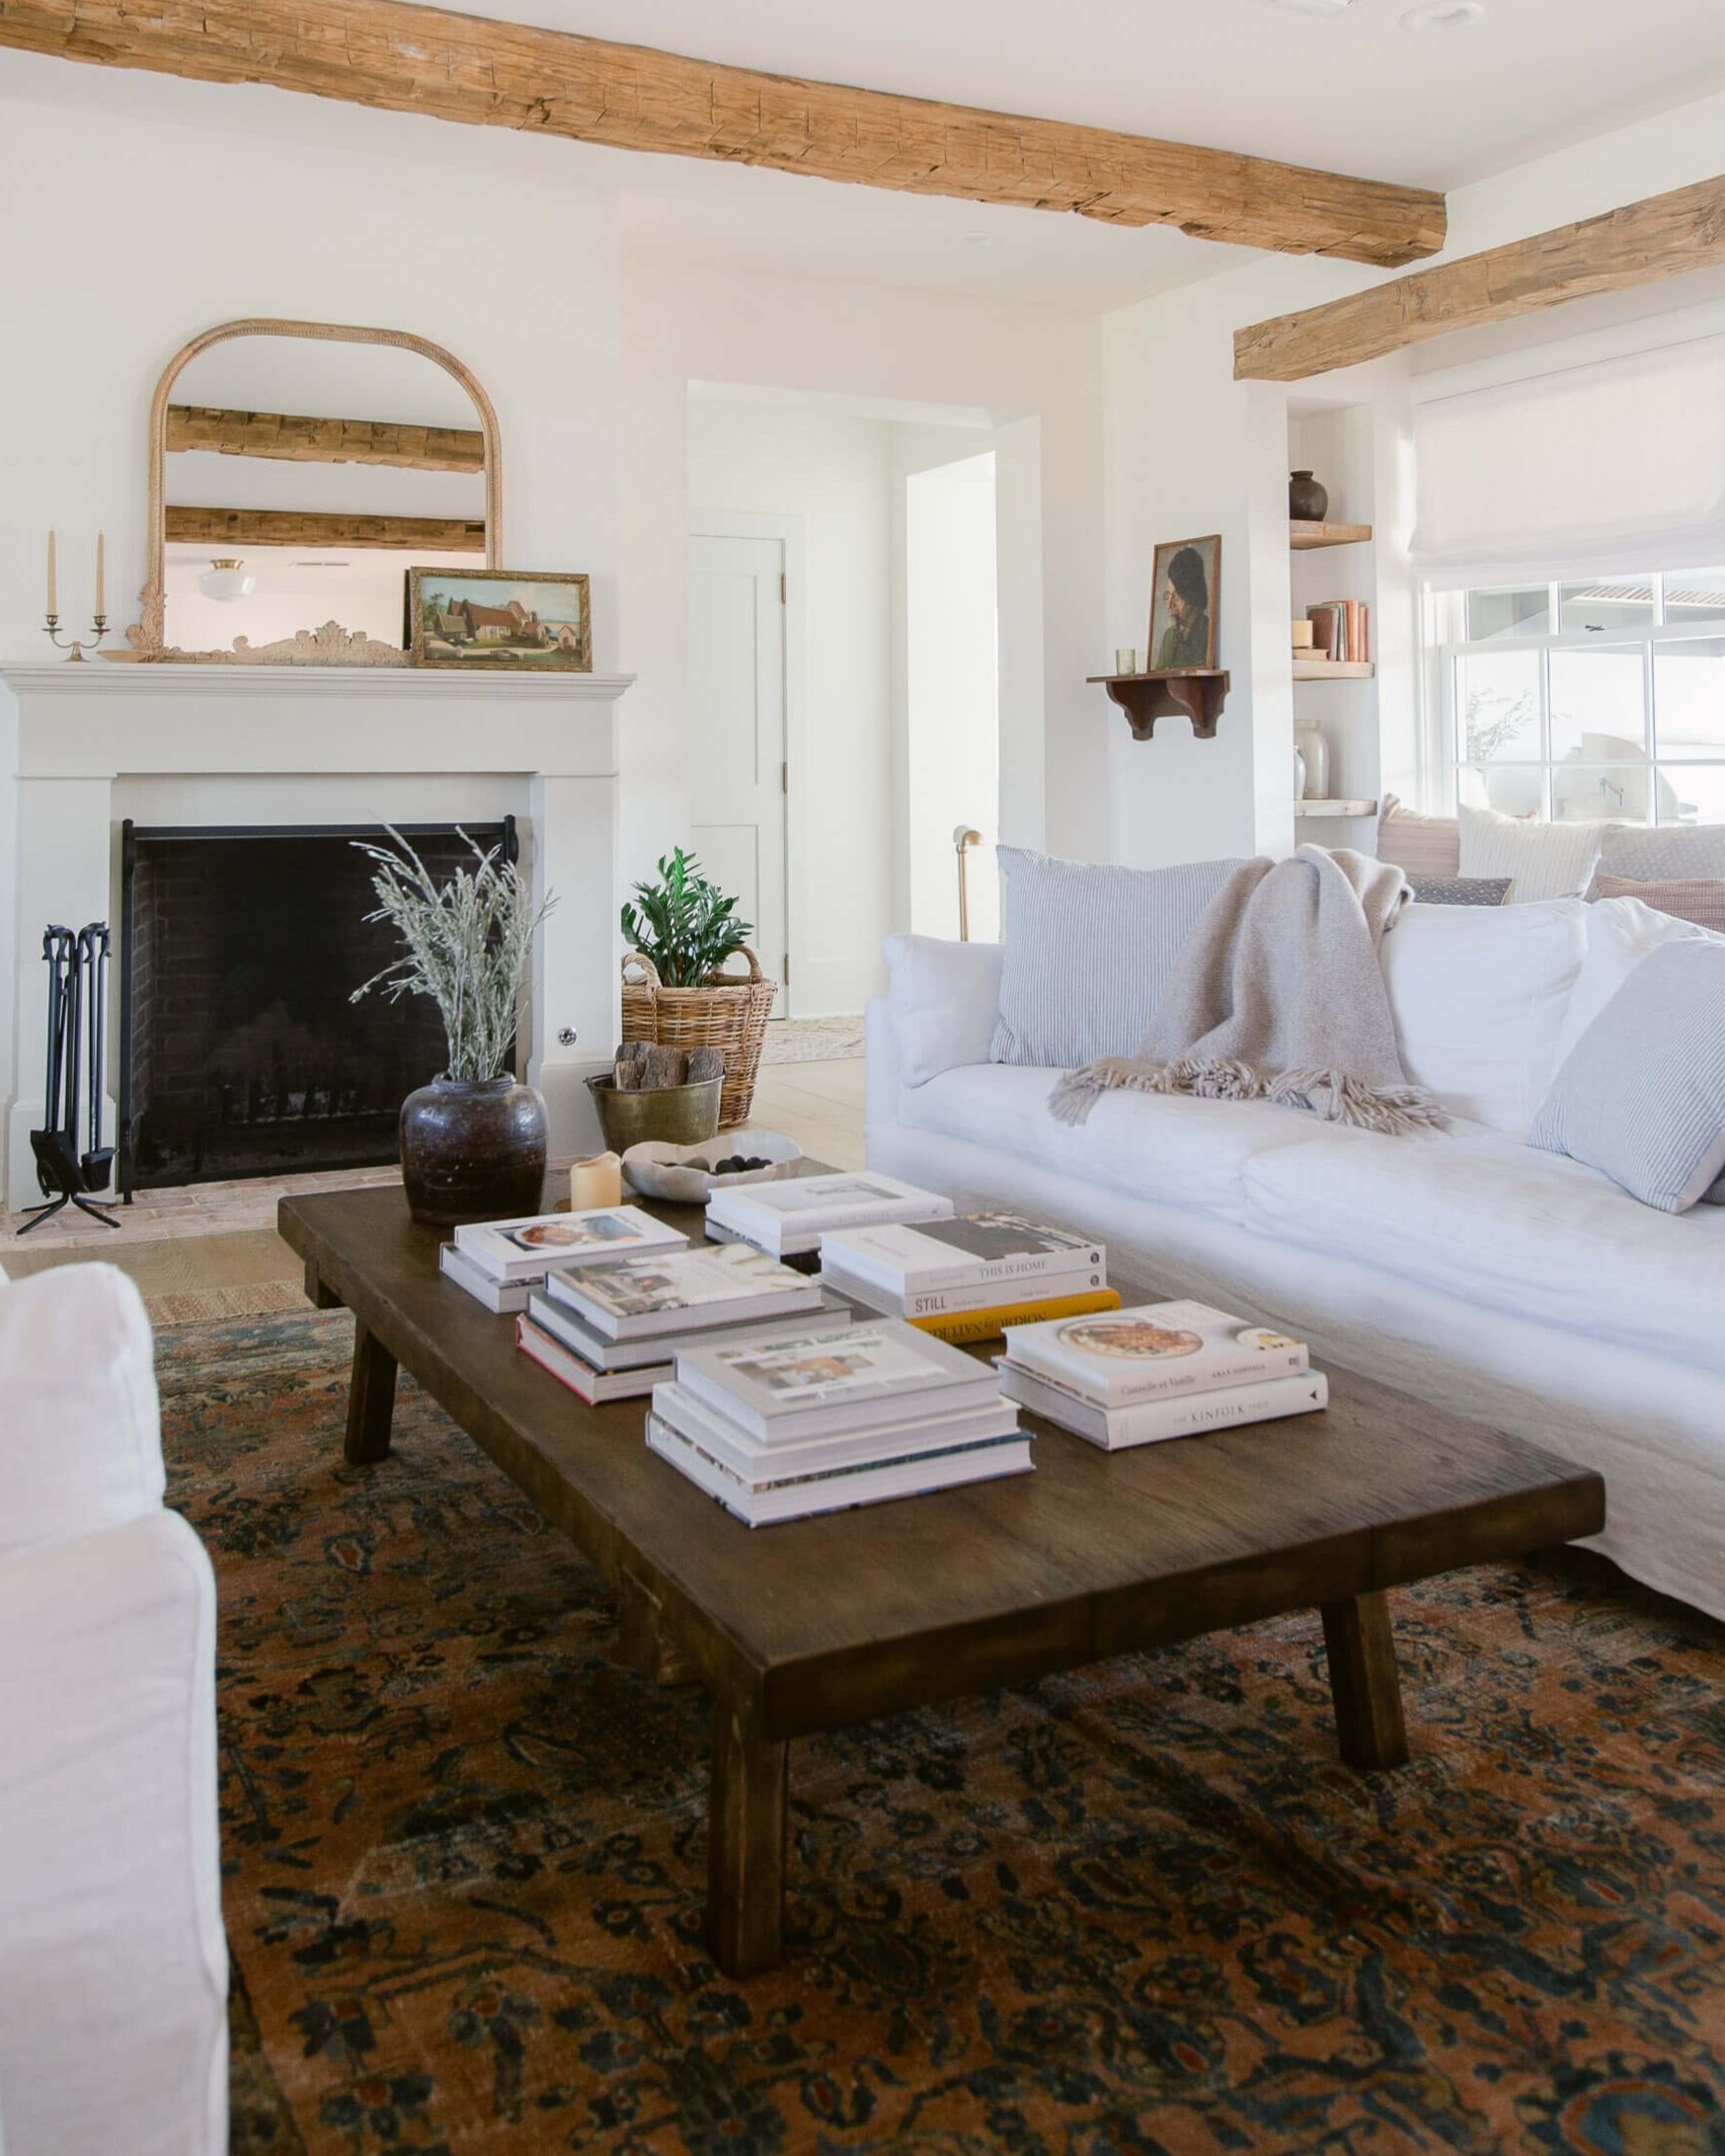 Folkway Co. is a boutique Dallas-Ft Worth based interior design company ...